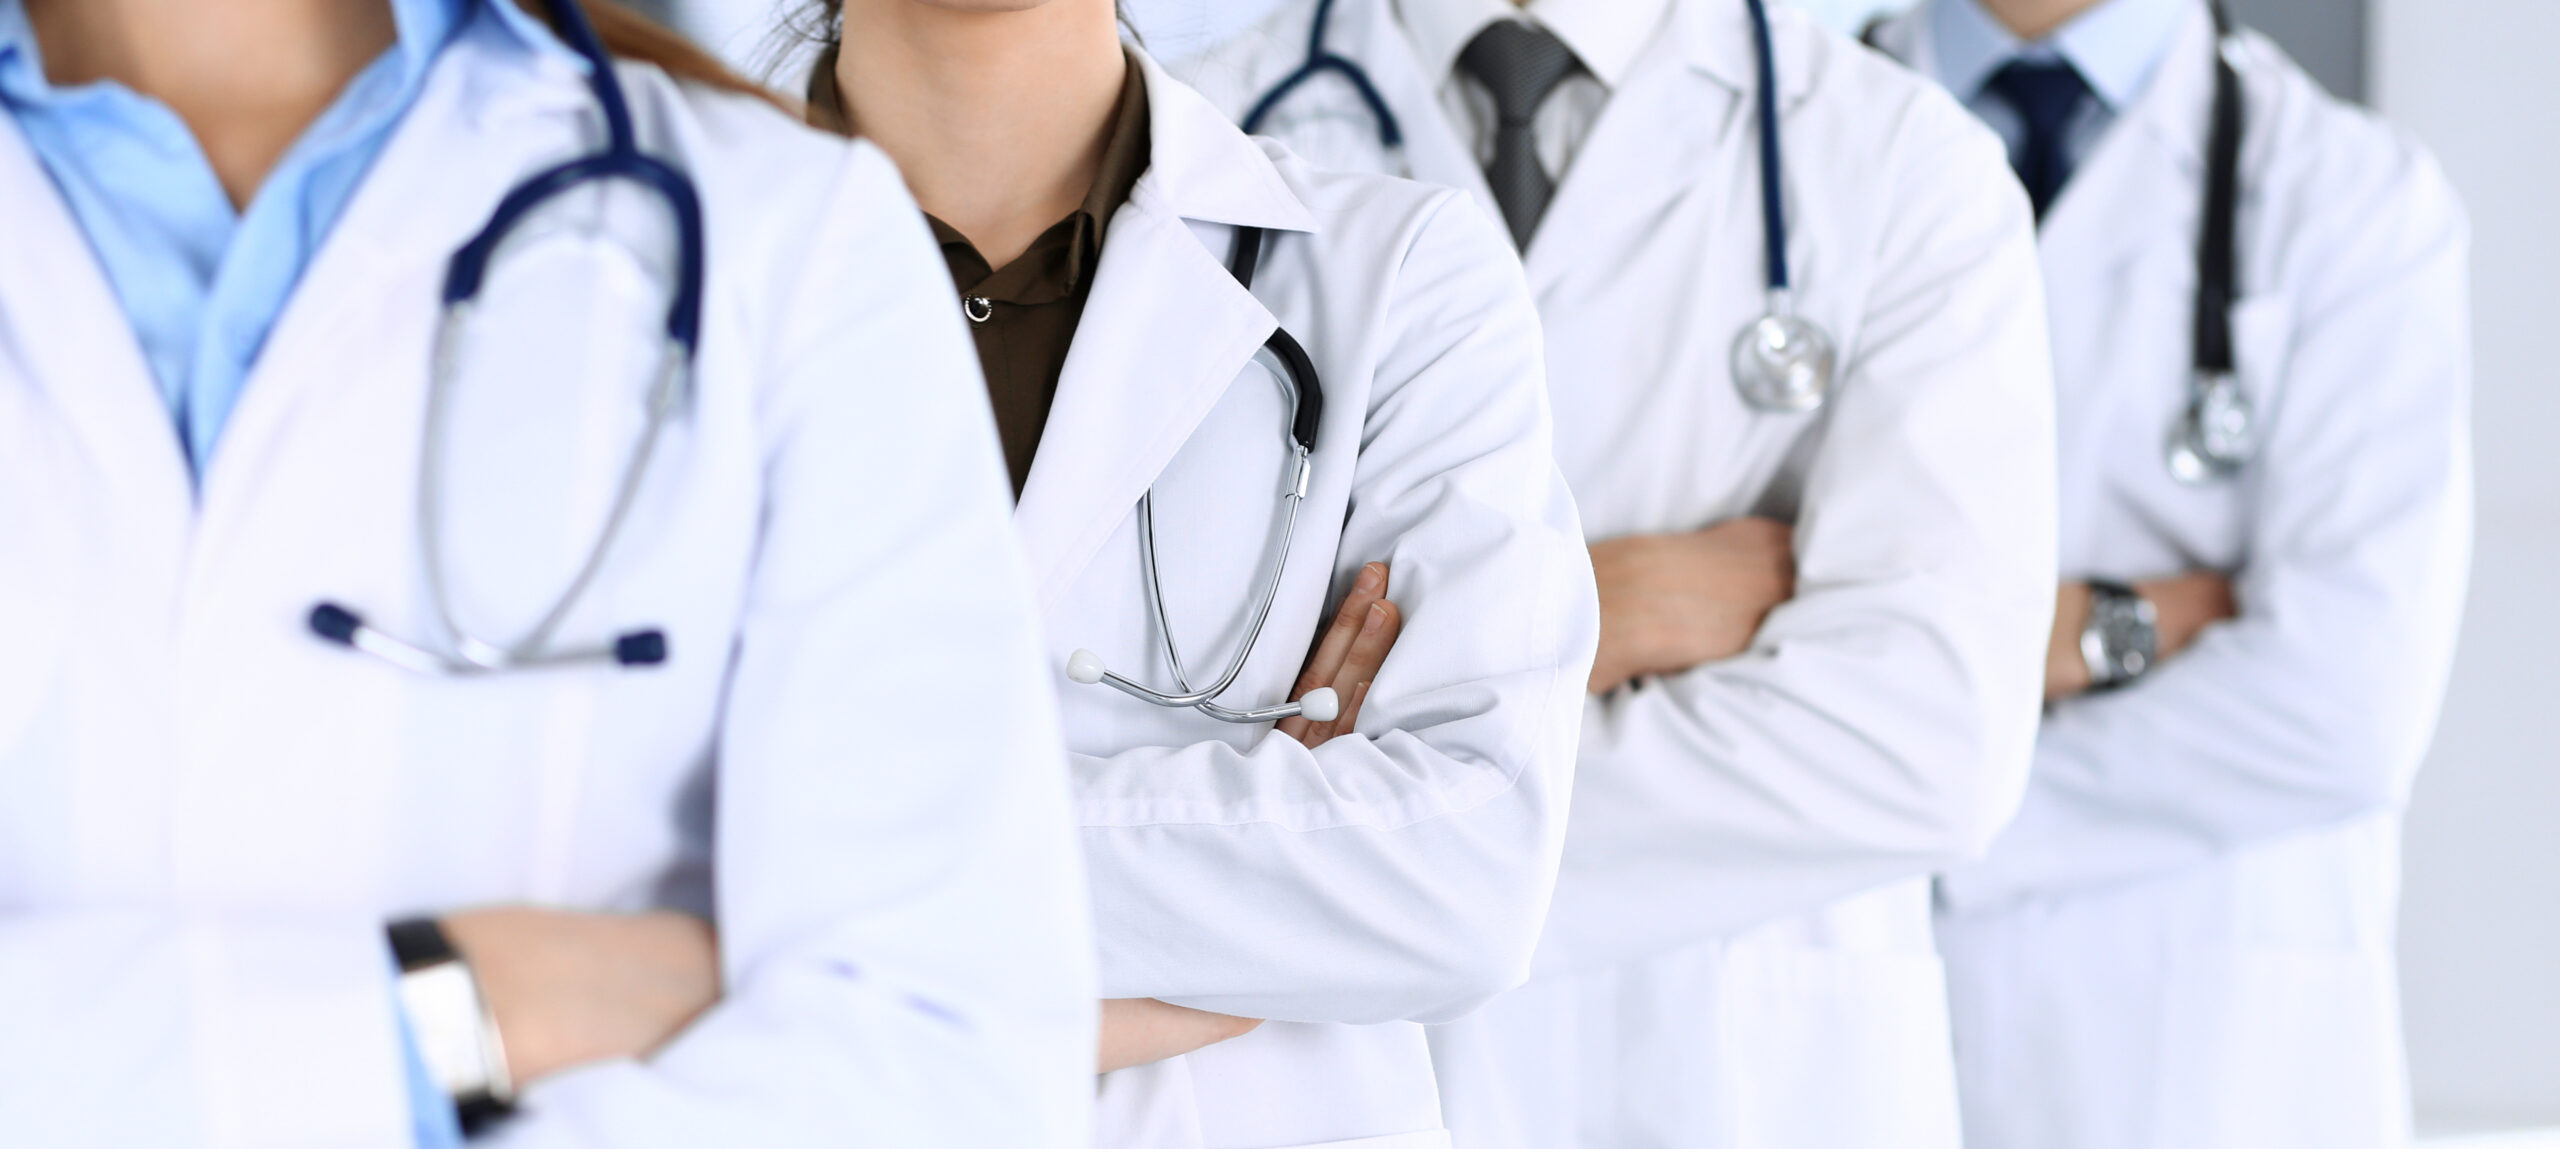 Group Disability Insurance: What Every Attending Physician Should Know